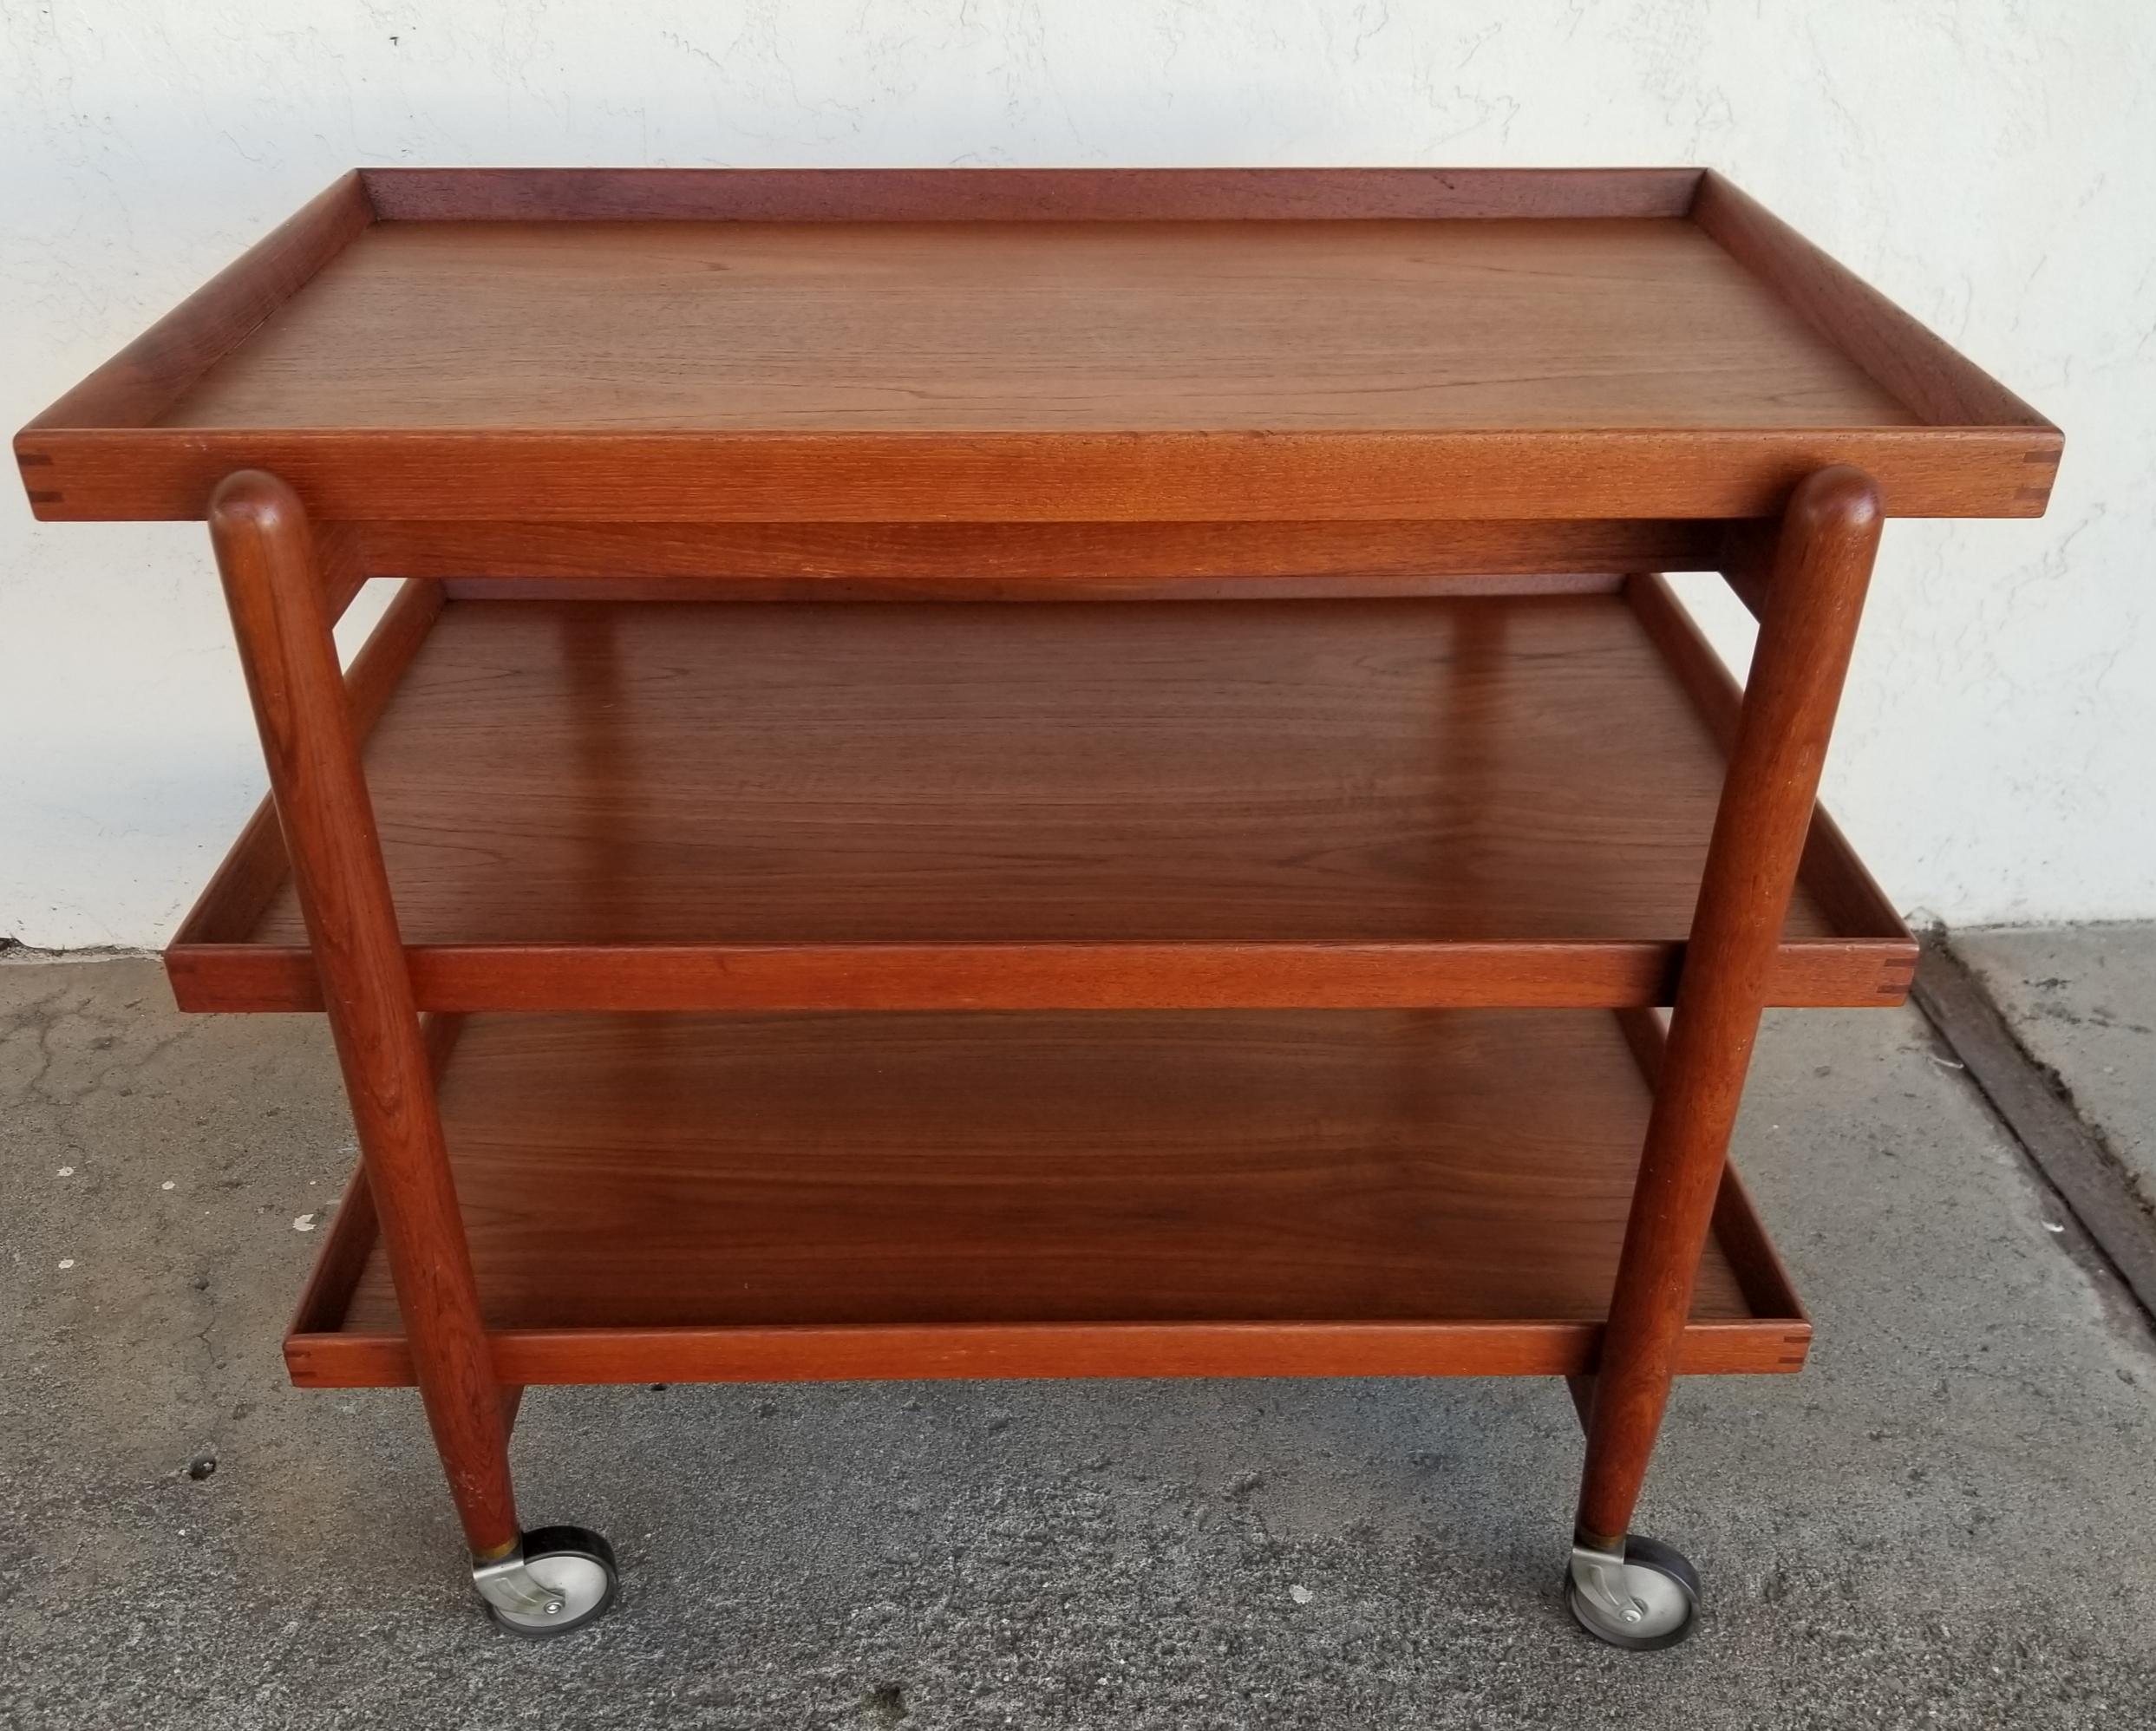 A 3-tier teak Danish modern bar cart / trolley on castors designed by Poul Hundevad, Denmark, circa 1960. Versatile configuration featuring a 3 tray design, 2 removable for serving or 1 may be attached to top level extending work or display surface